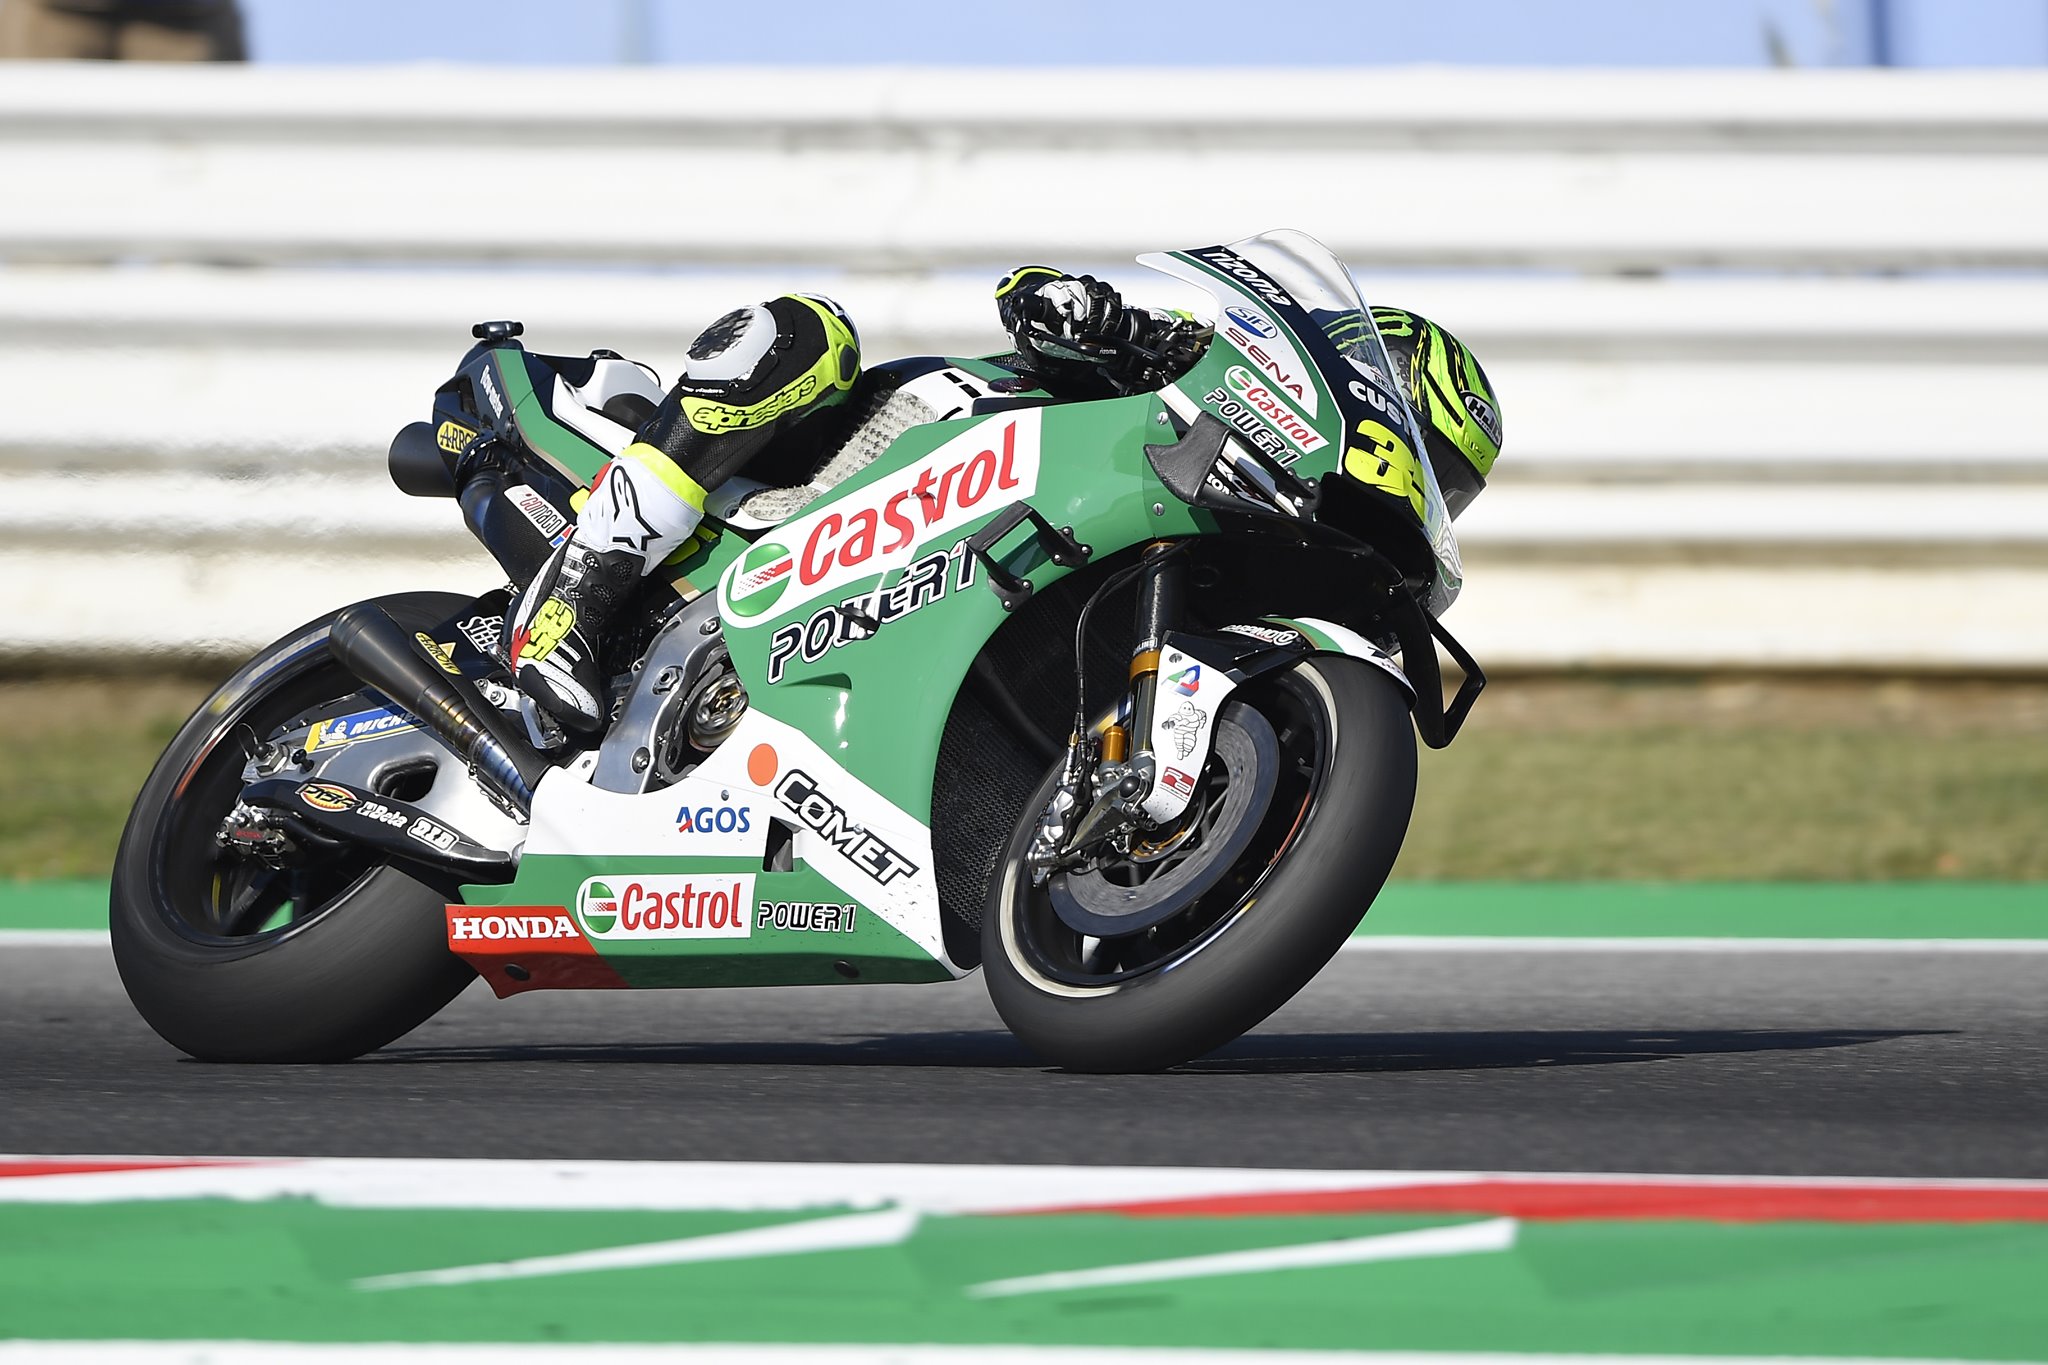 DNf for Crutchlow at Misano